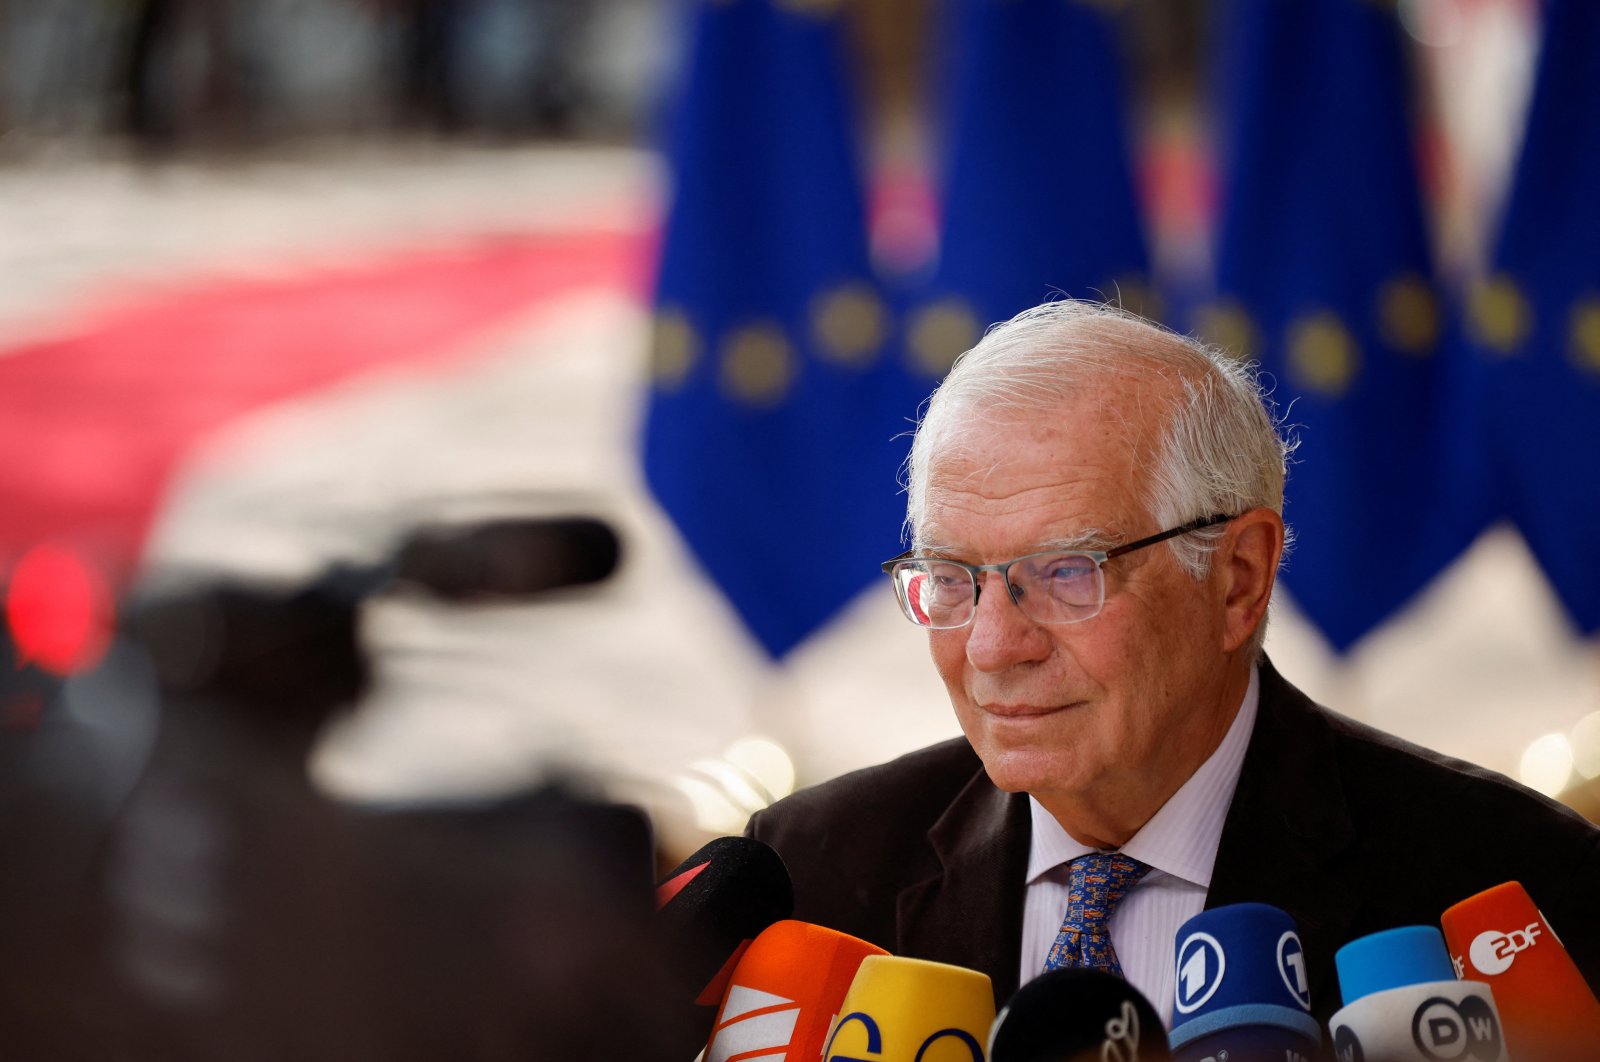 High Representative of the European Union for Foreign Affairs and Security Policy Josep Borrell speaks to the members of the media as he arrives for a meeting of Western Balkans countries leaders with EU leaders, Brussels, Belgium, June 23, 2022. (Reuters Photo)